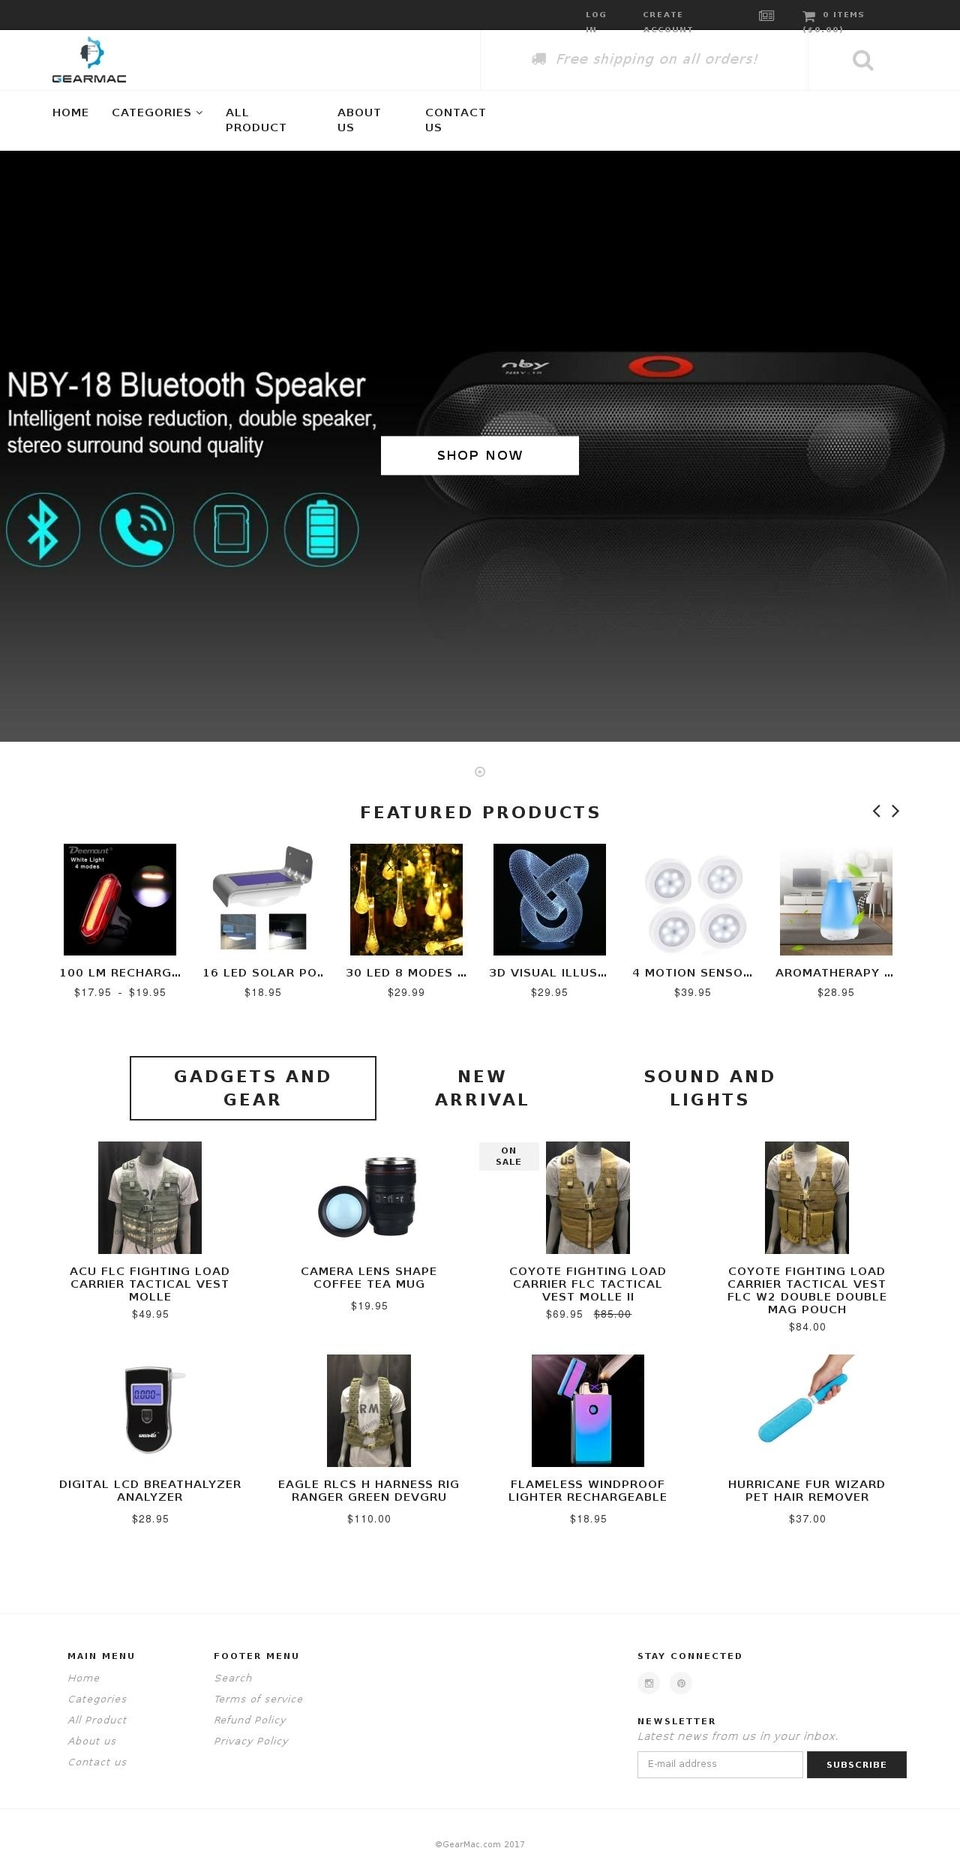 annabelle-v1-2 Shopify theme site example gearmac.com